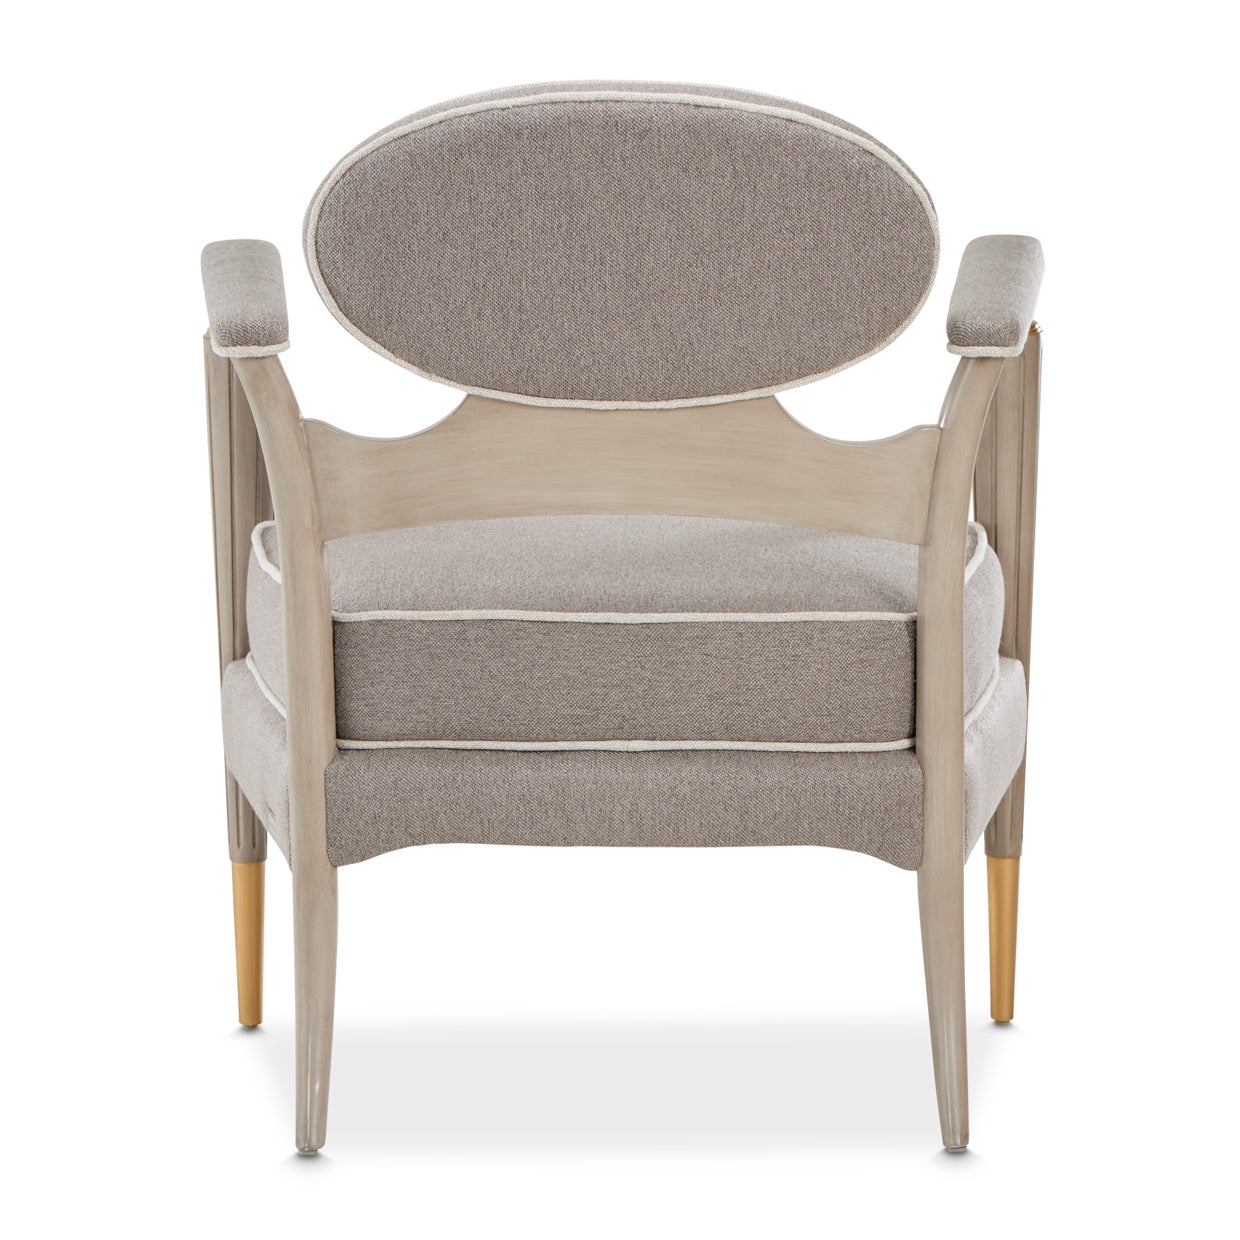 Accent Chair,St.Charles,comfortable seating,Dove Gray finish,slender legs,classic shape,